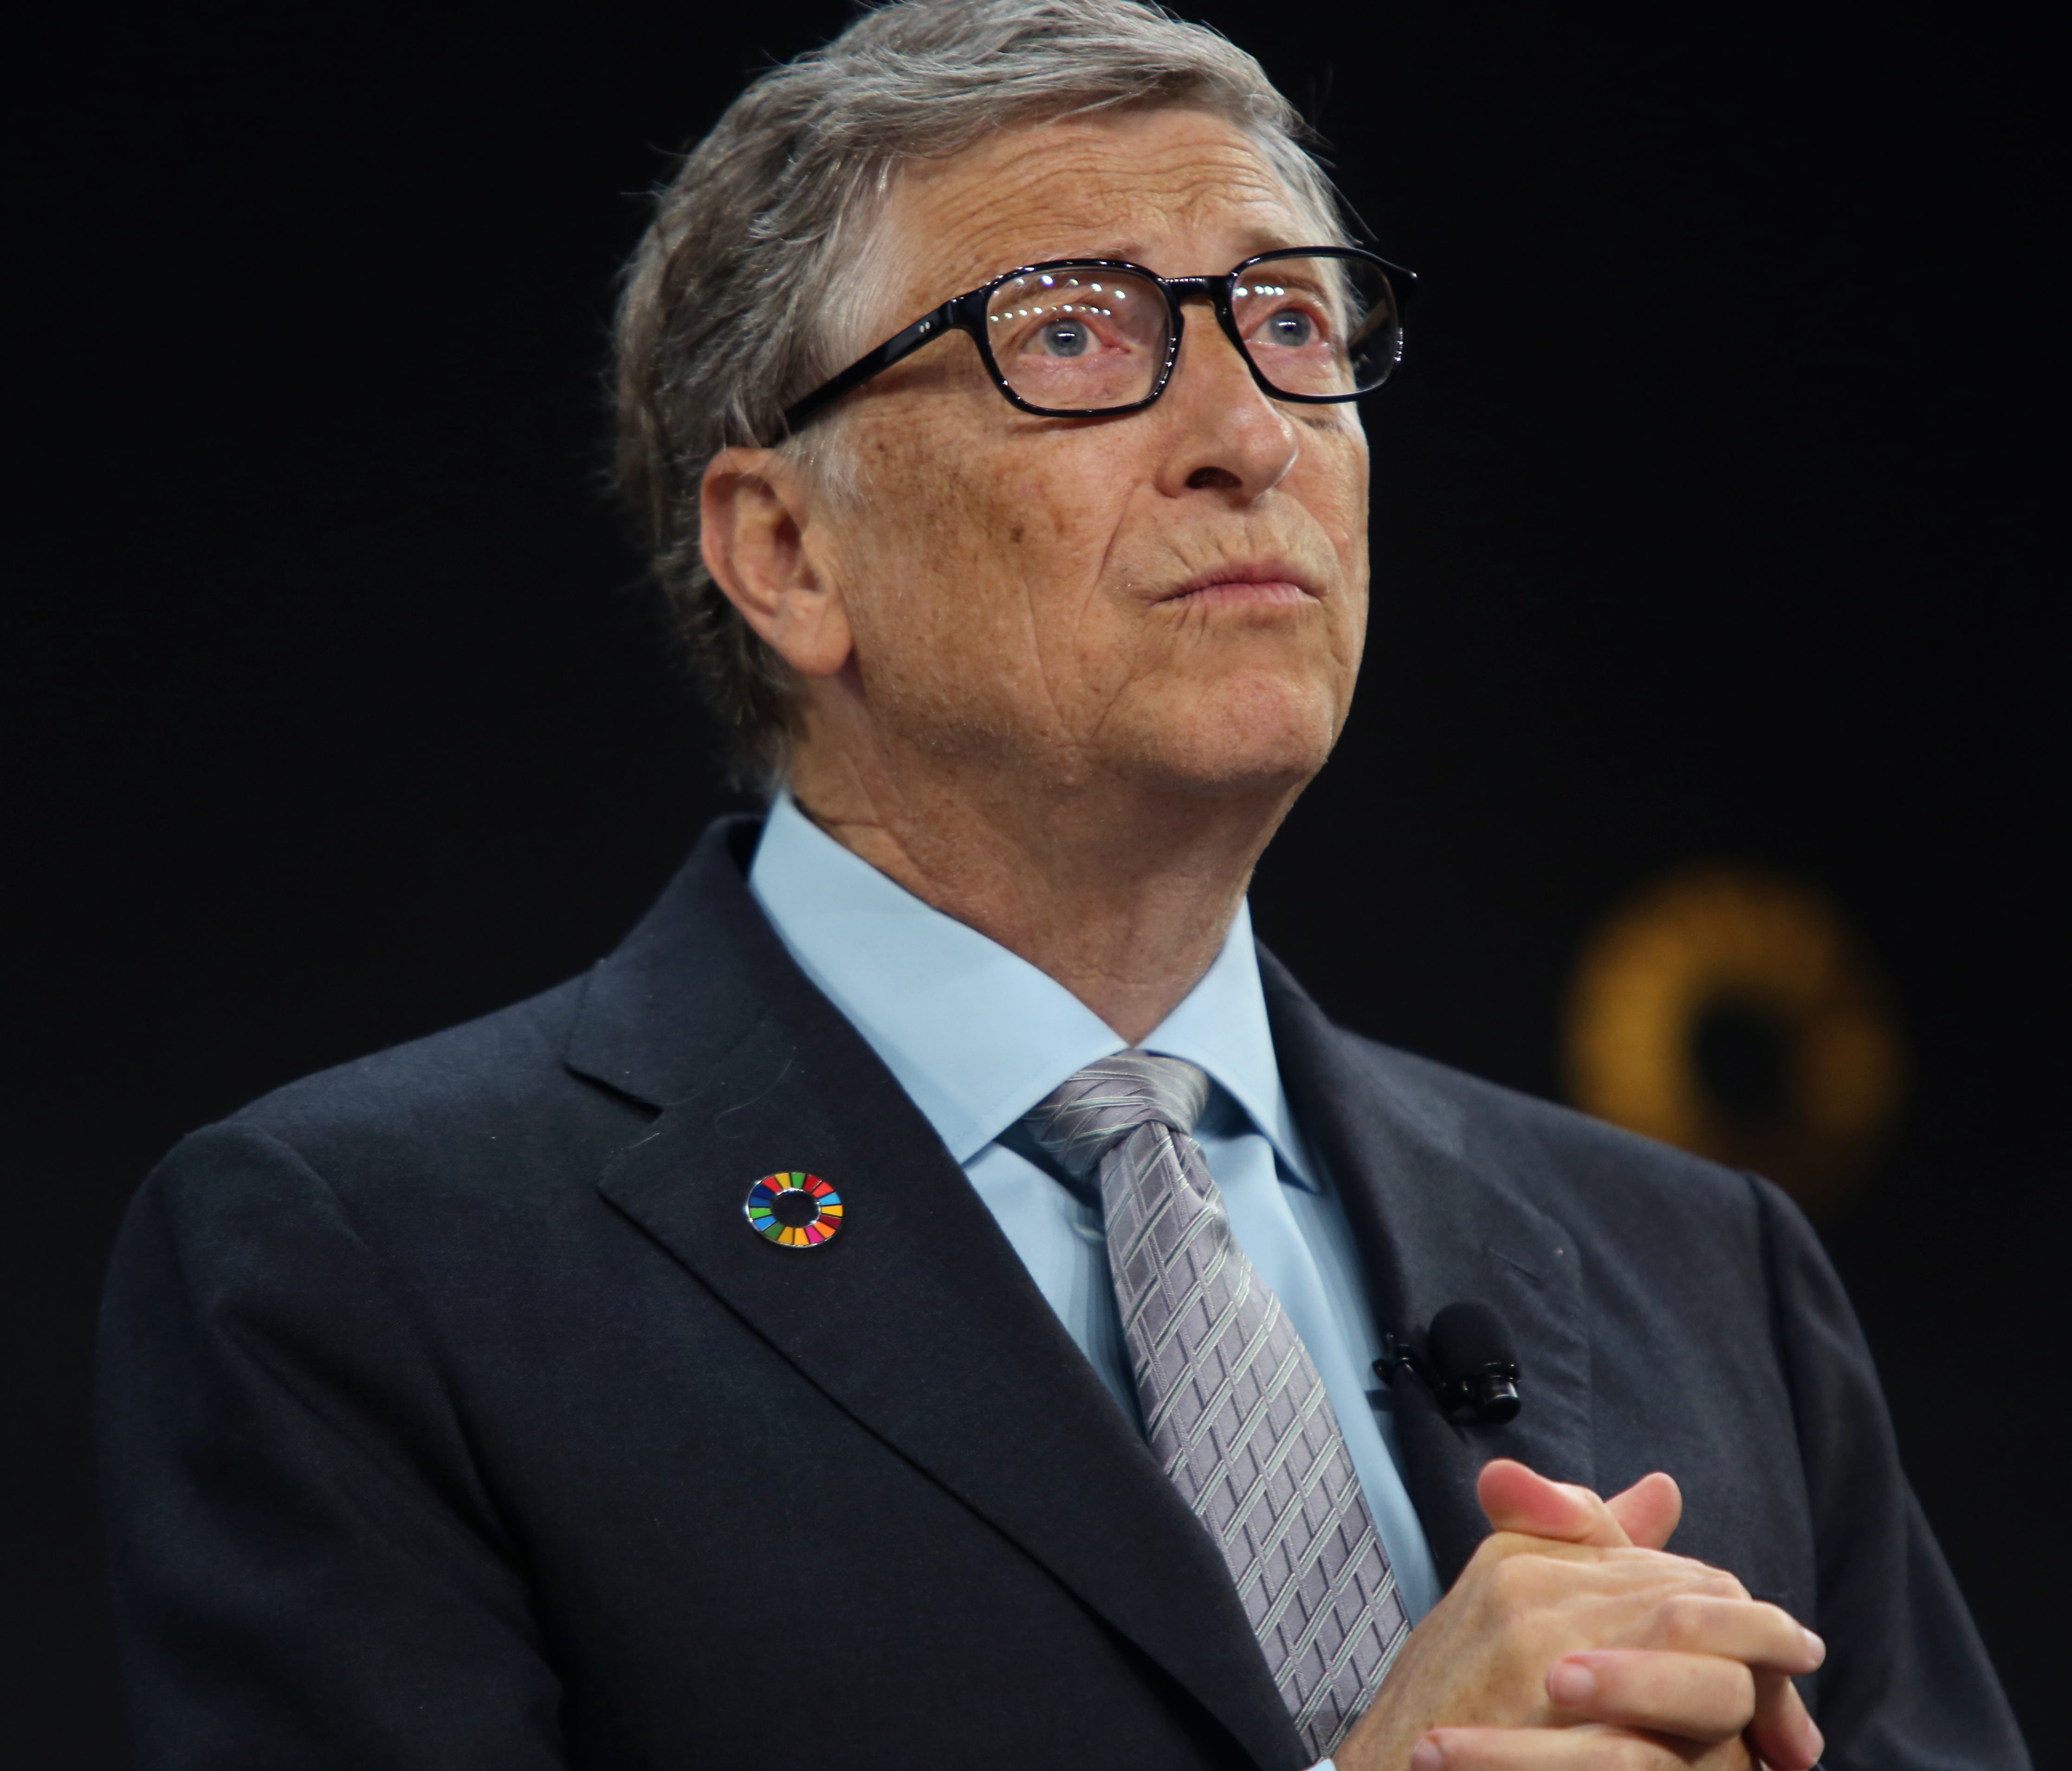 Bill Gates speaks ahead of former U.S. President Barack Obama at the Gates Foundation Inaugural Goalkeepers event on September 20, 2017 in New York City.